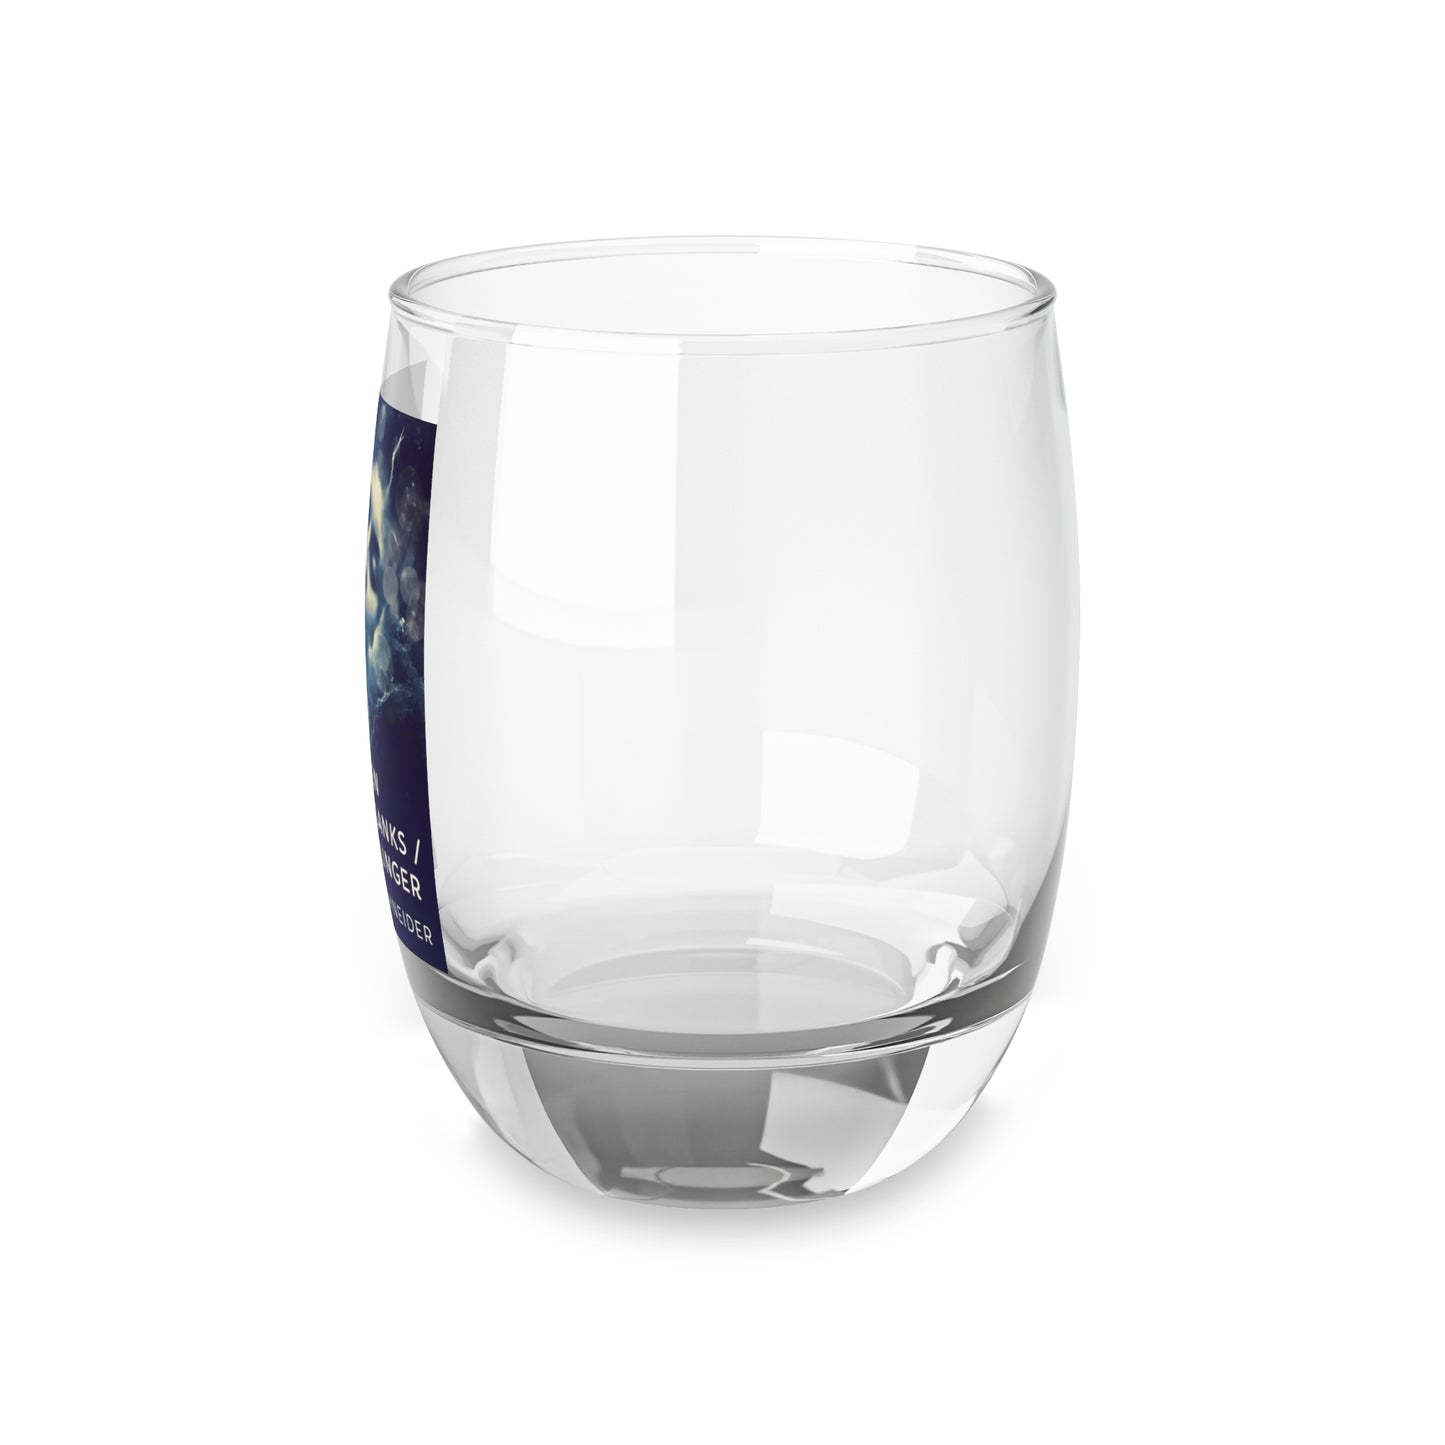 When Links / Blanks / Puzzles Linger - Whiskey Glass